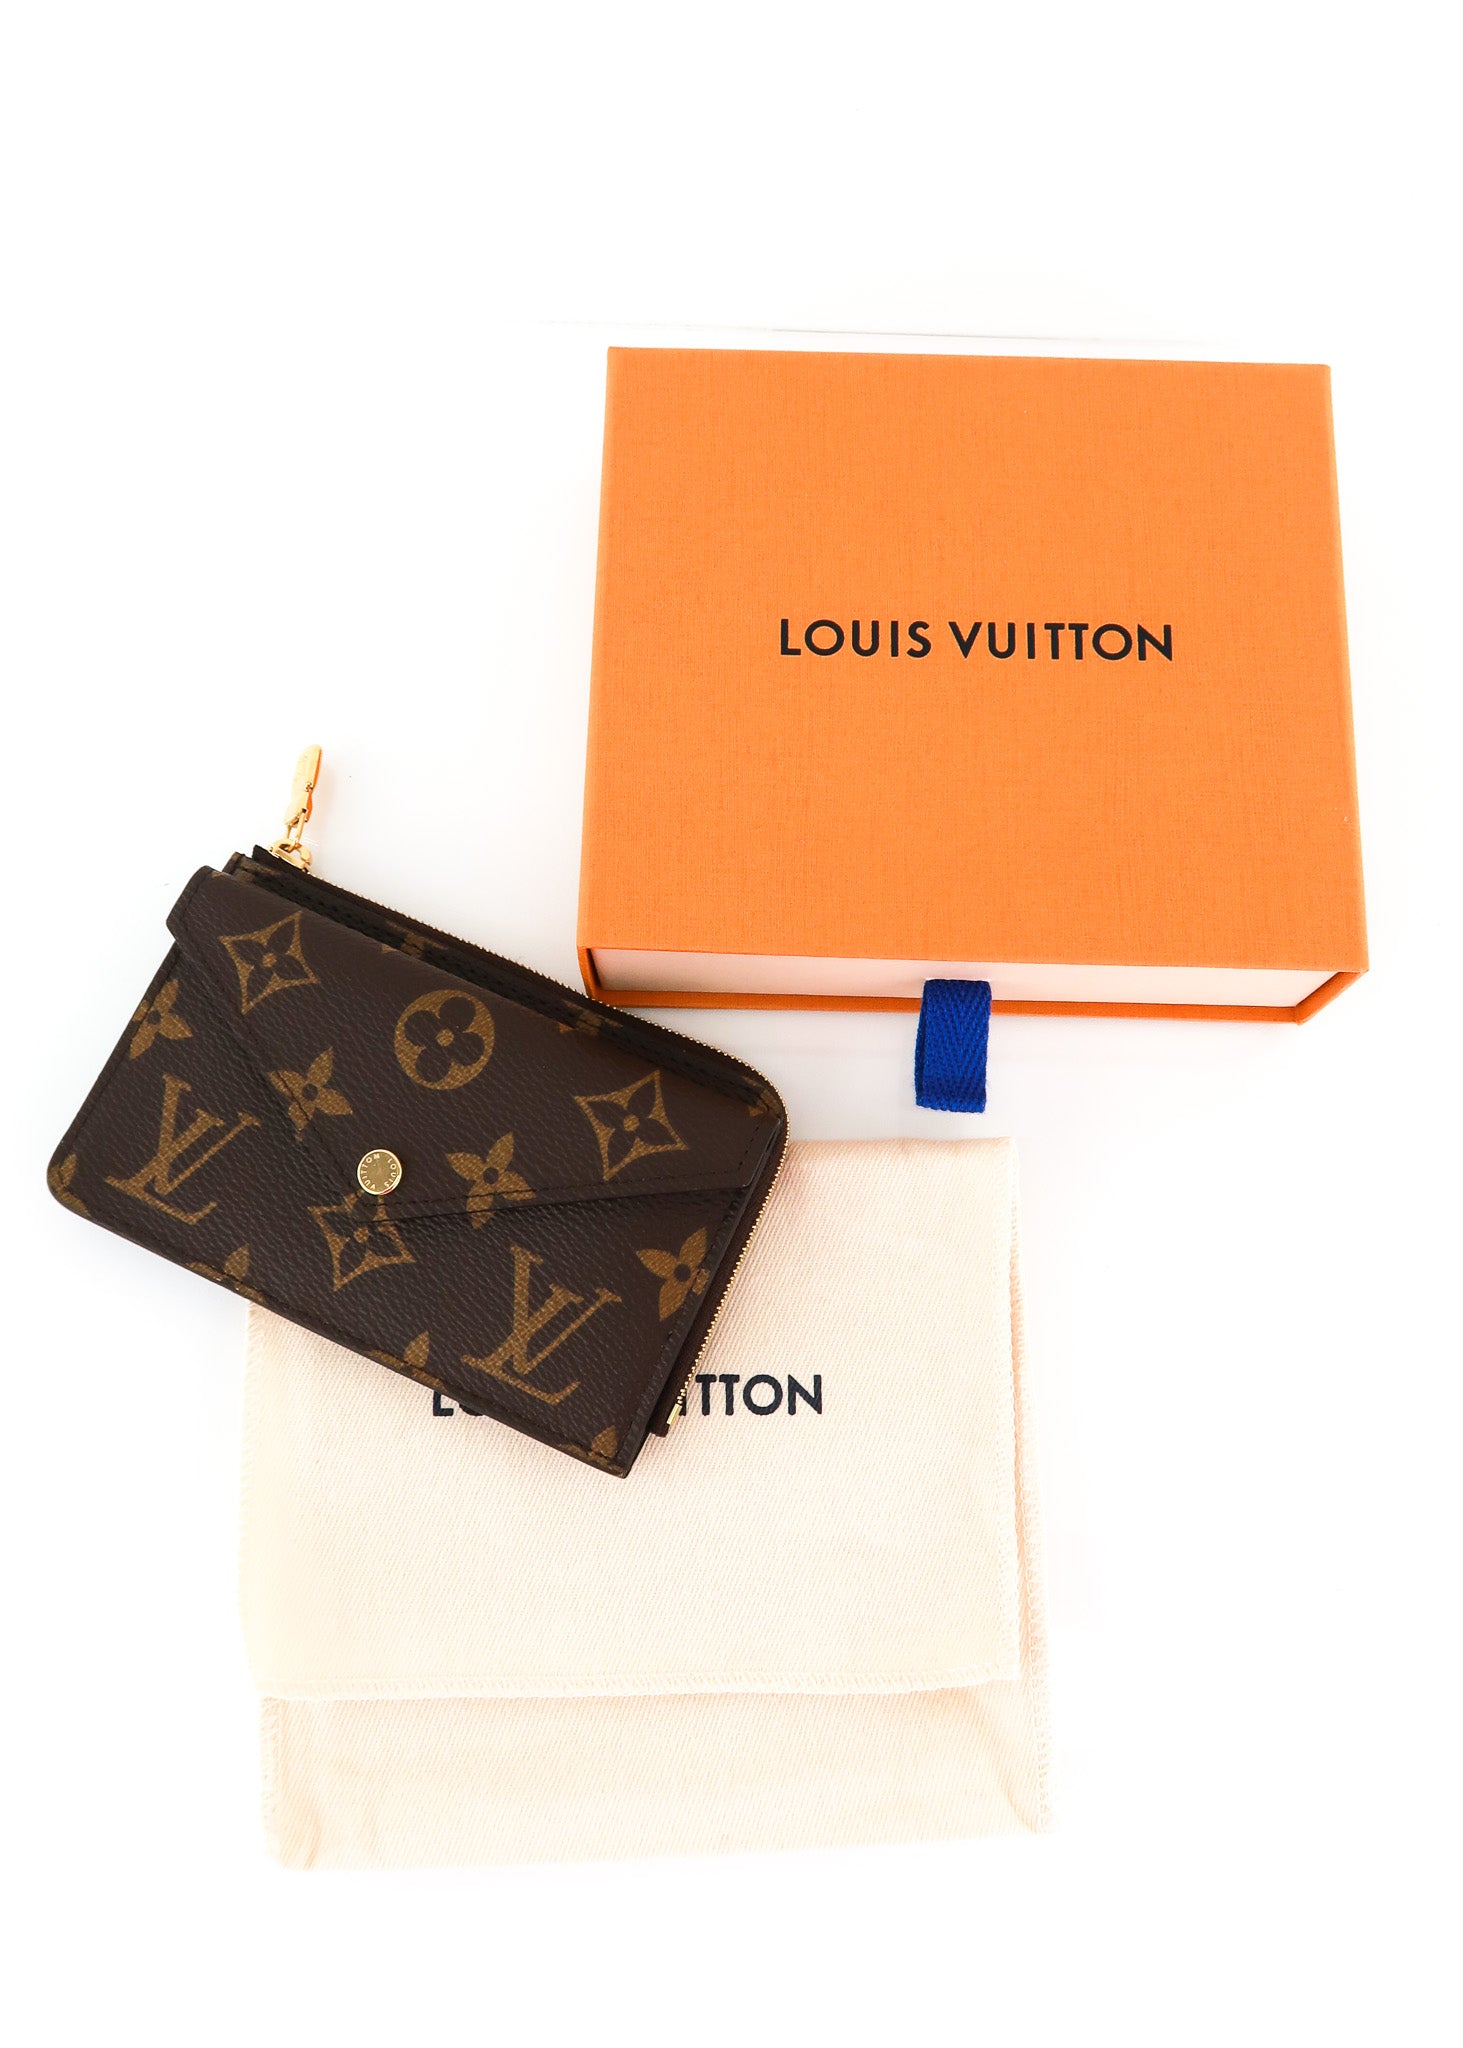 LOUIS VUITTON RECTO VERSO VS. KEY POUCH - WHICH ONE IS BETTER? 